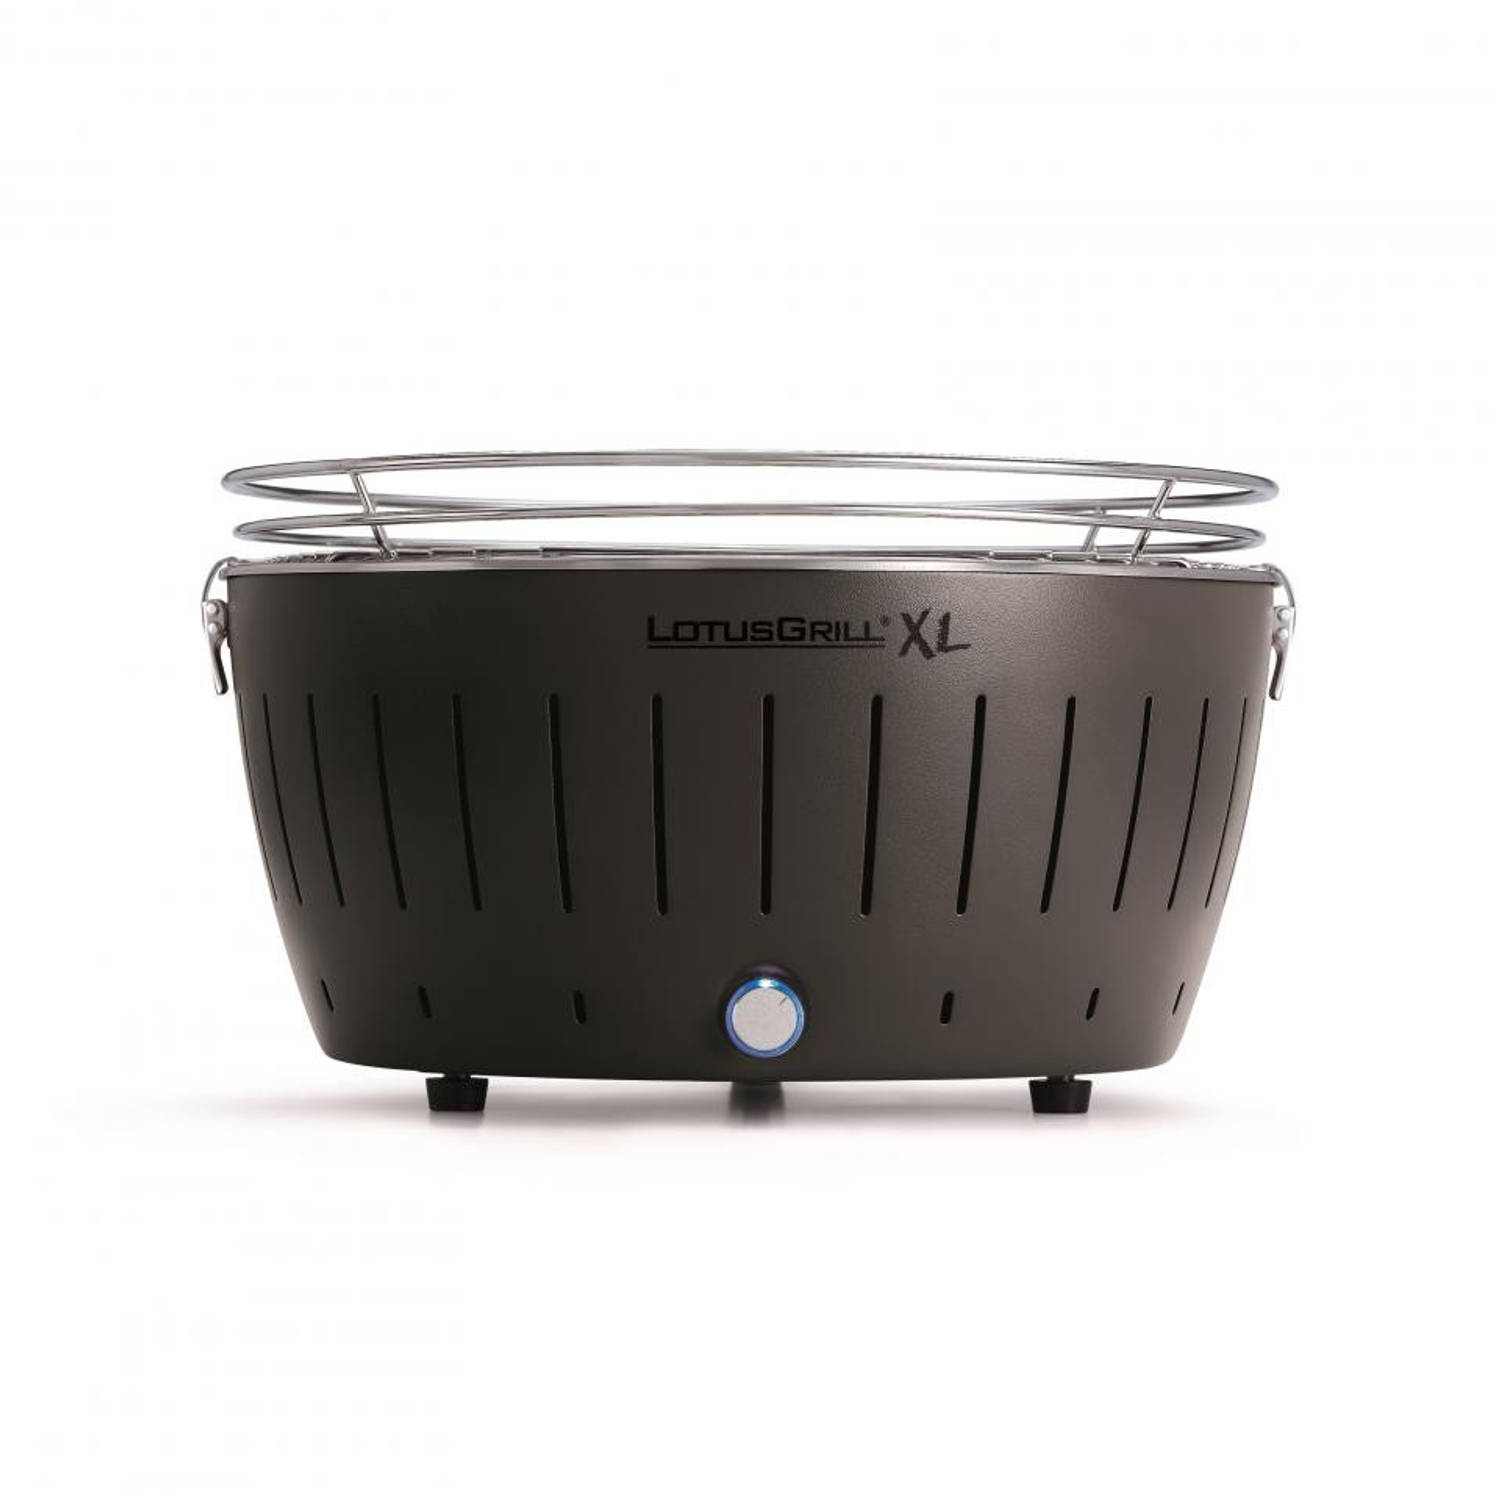 LotusGrill XL Houtskoolbarbecue 43,5 cm- Antraciet